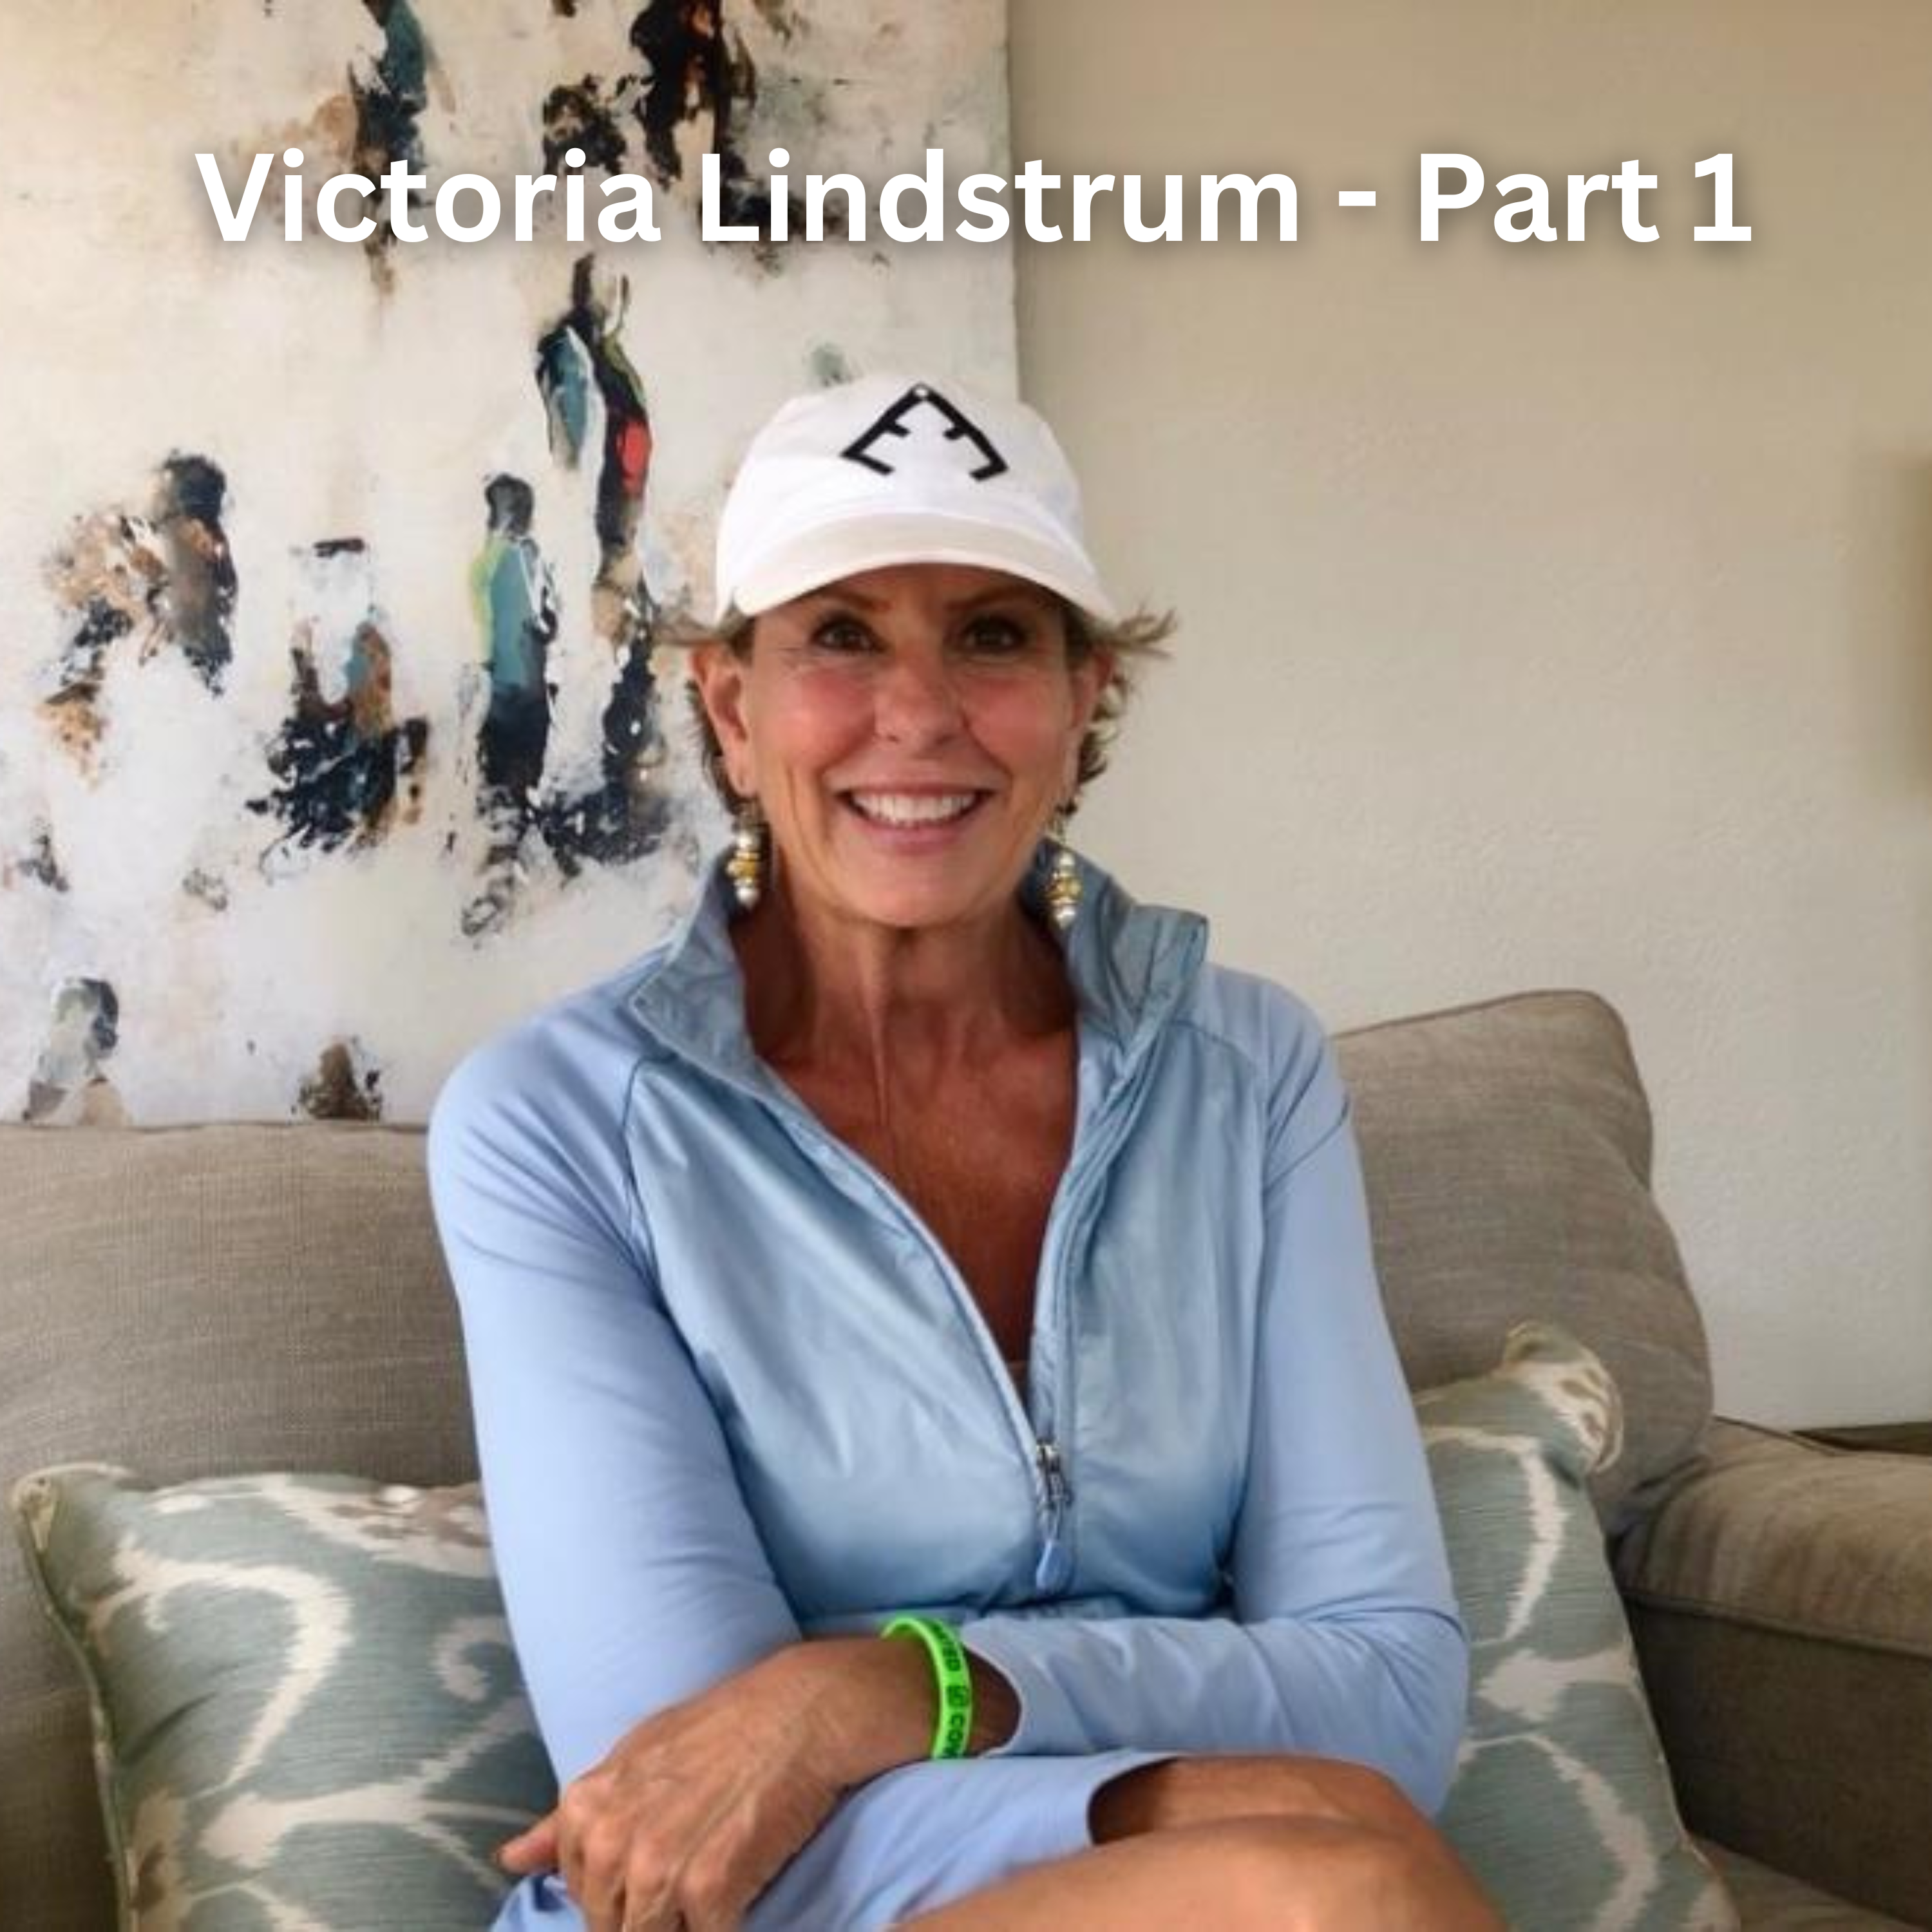 Using a Stager Part 1. Interview with Victoria Lindstrum